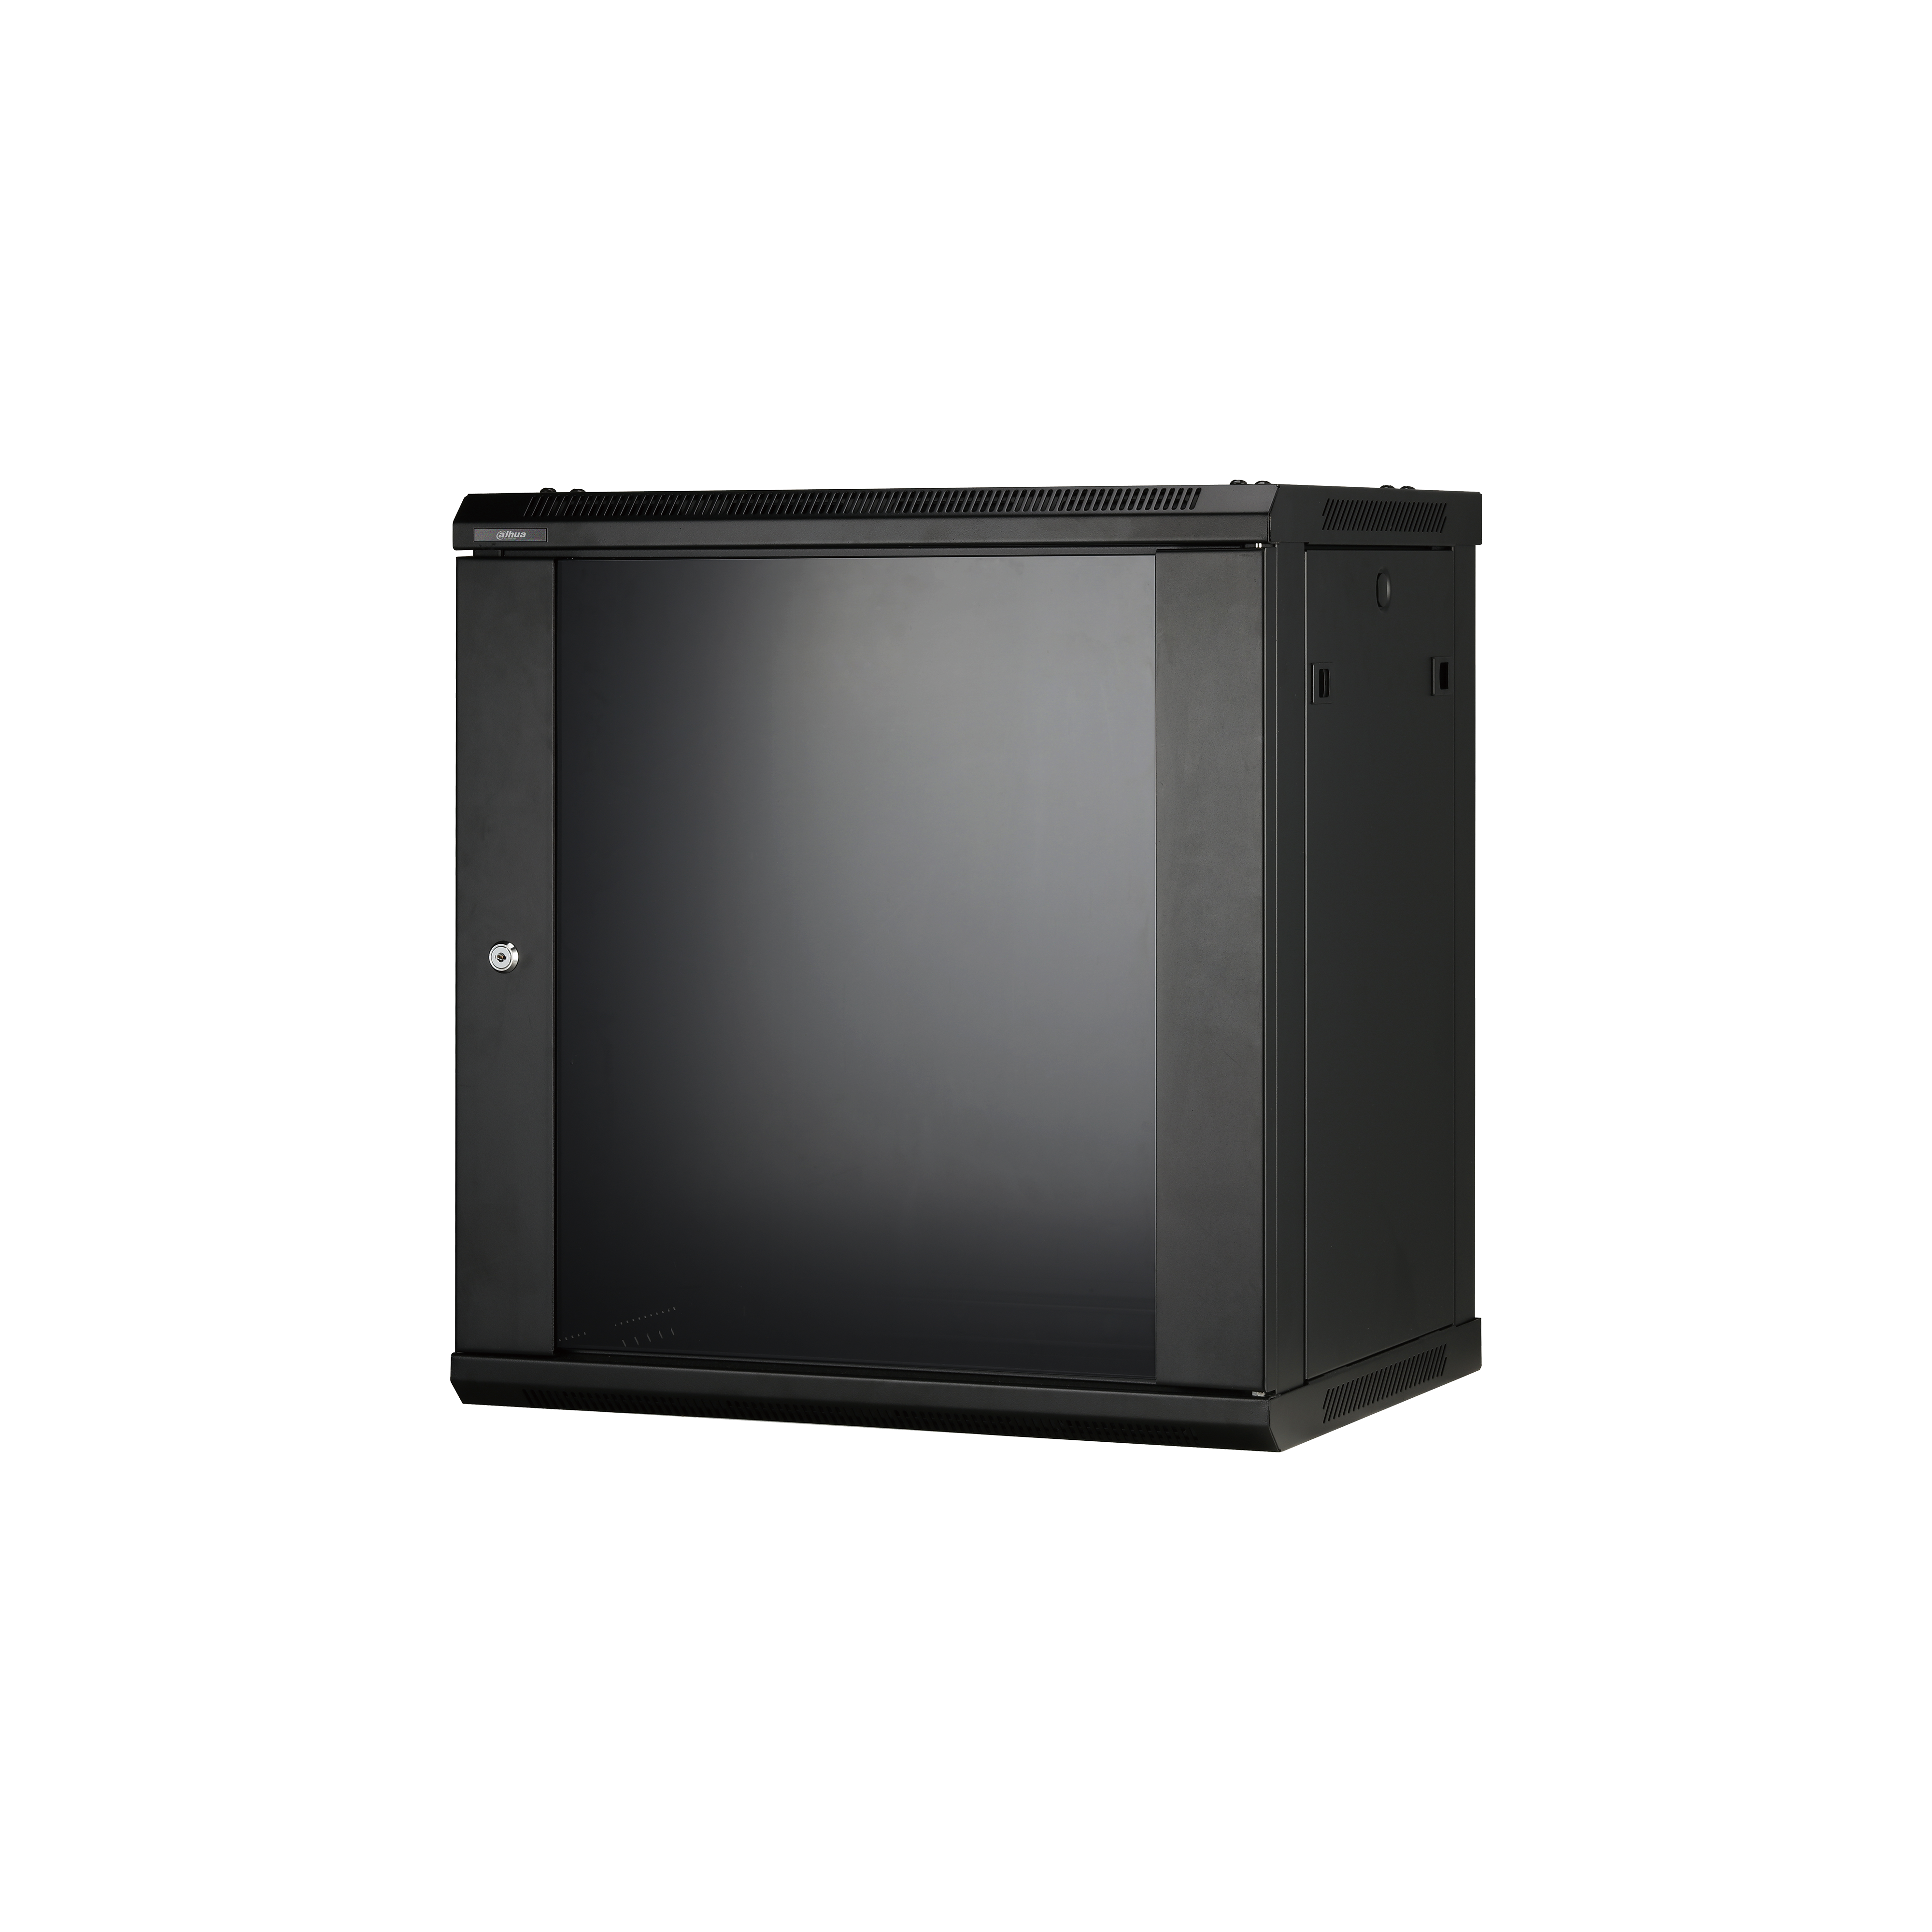 19” 12U Wall Mount Cabinet for PoE Network Switches, NVRs, Servers, etc - MA12URC - Montavue